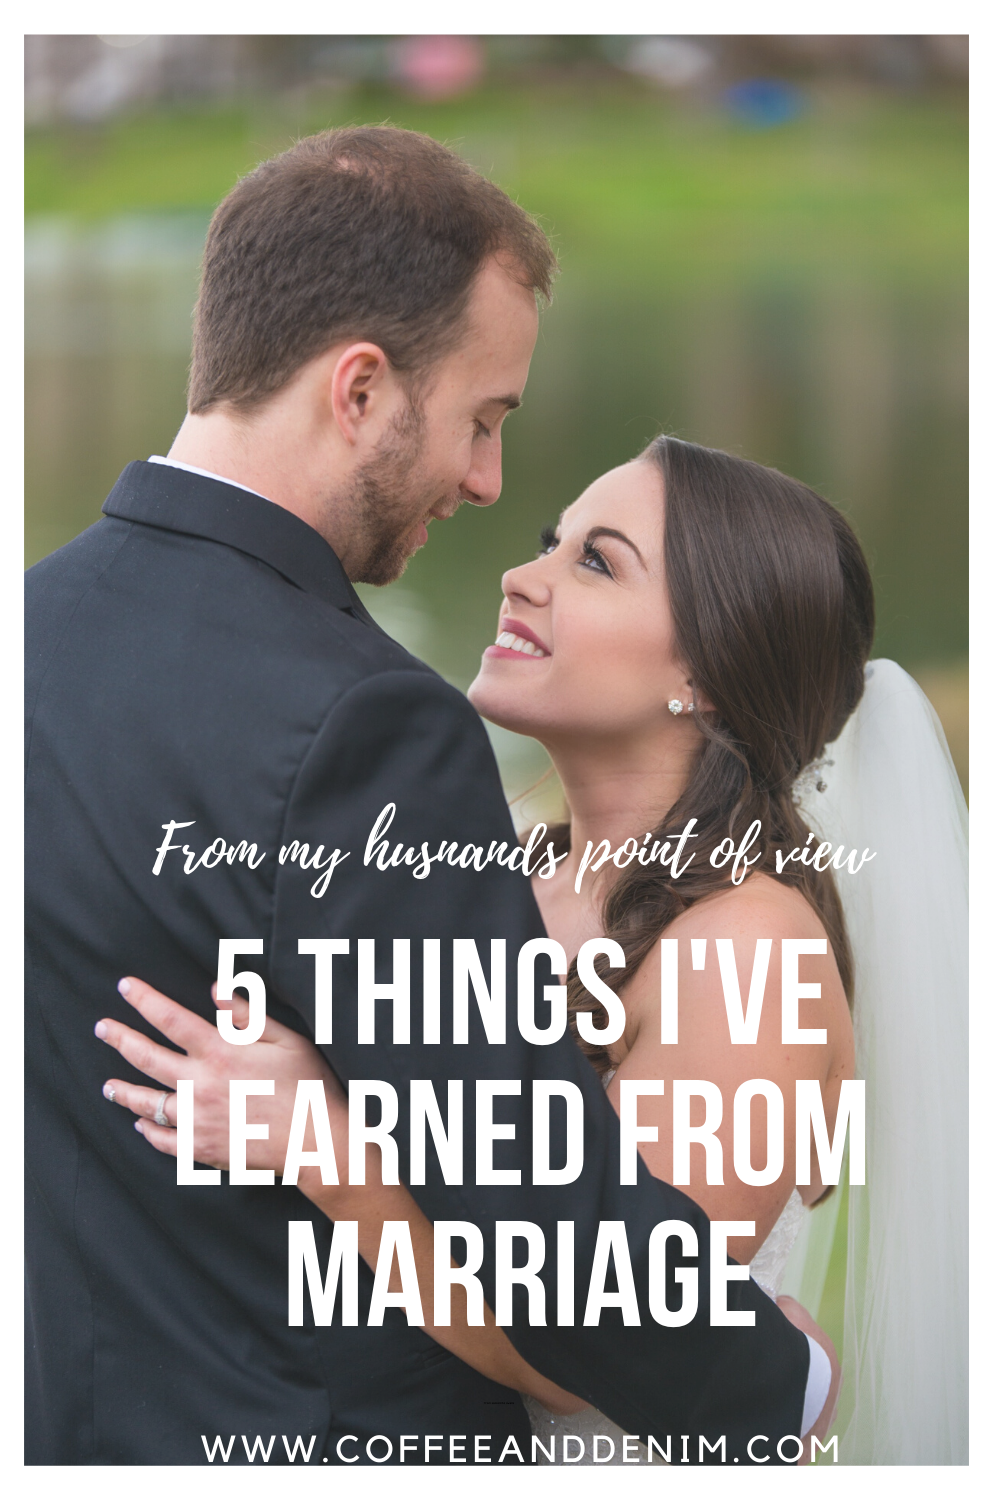 5 Things I’ve Learned About Marriage – From My Husband’s Point of View